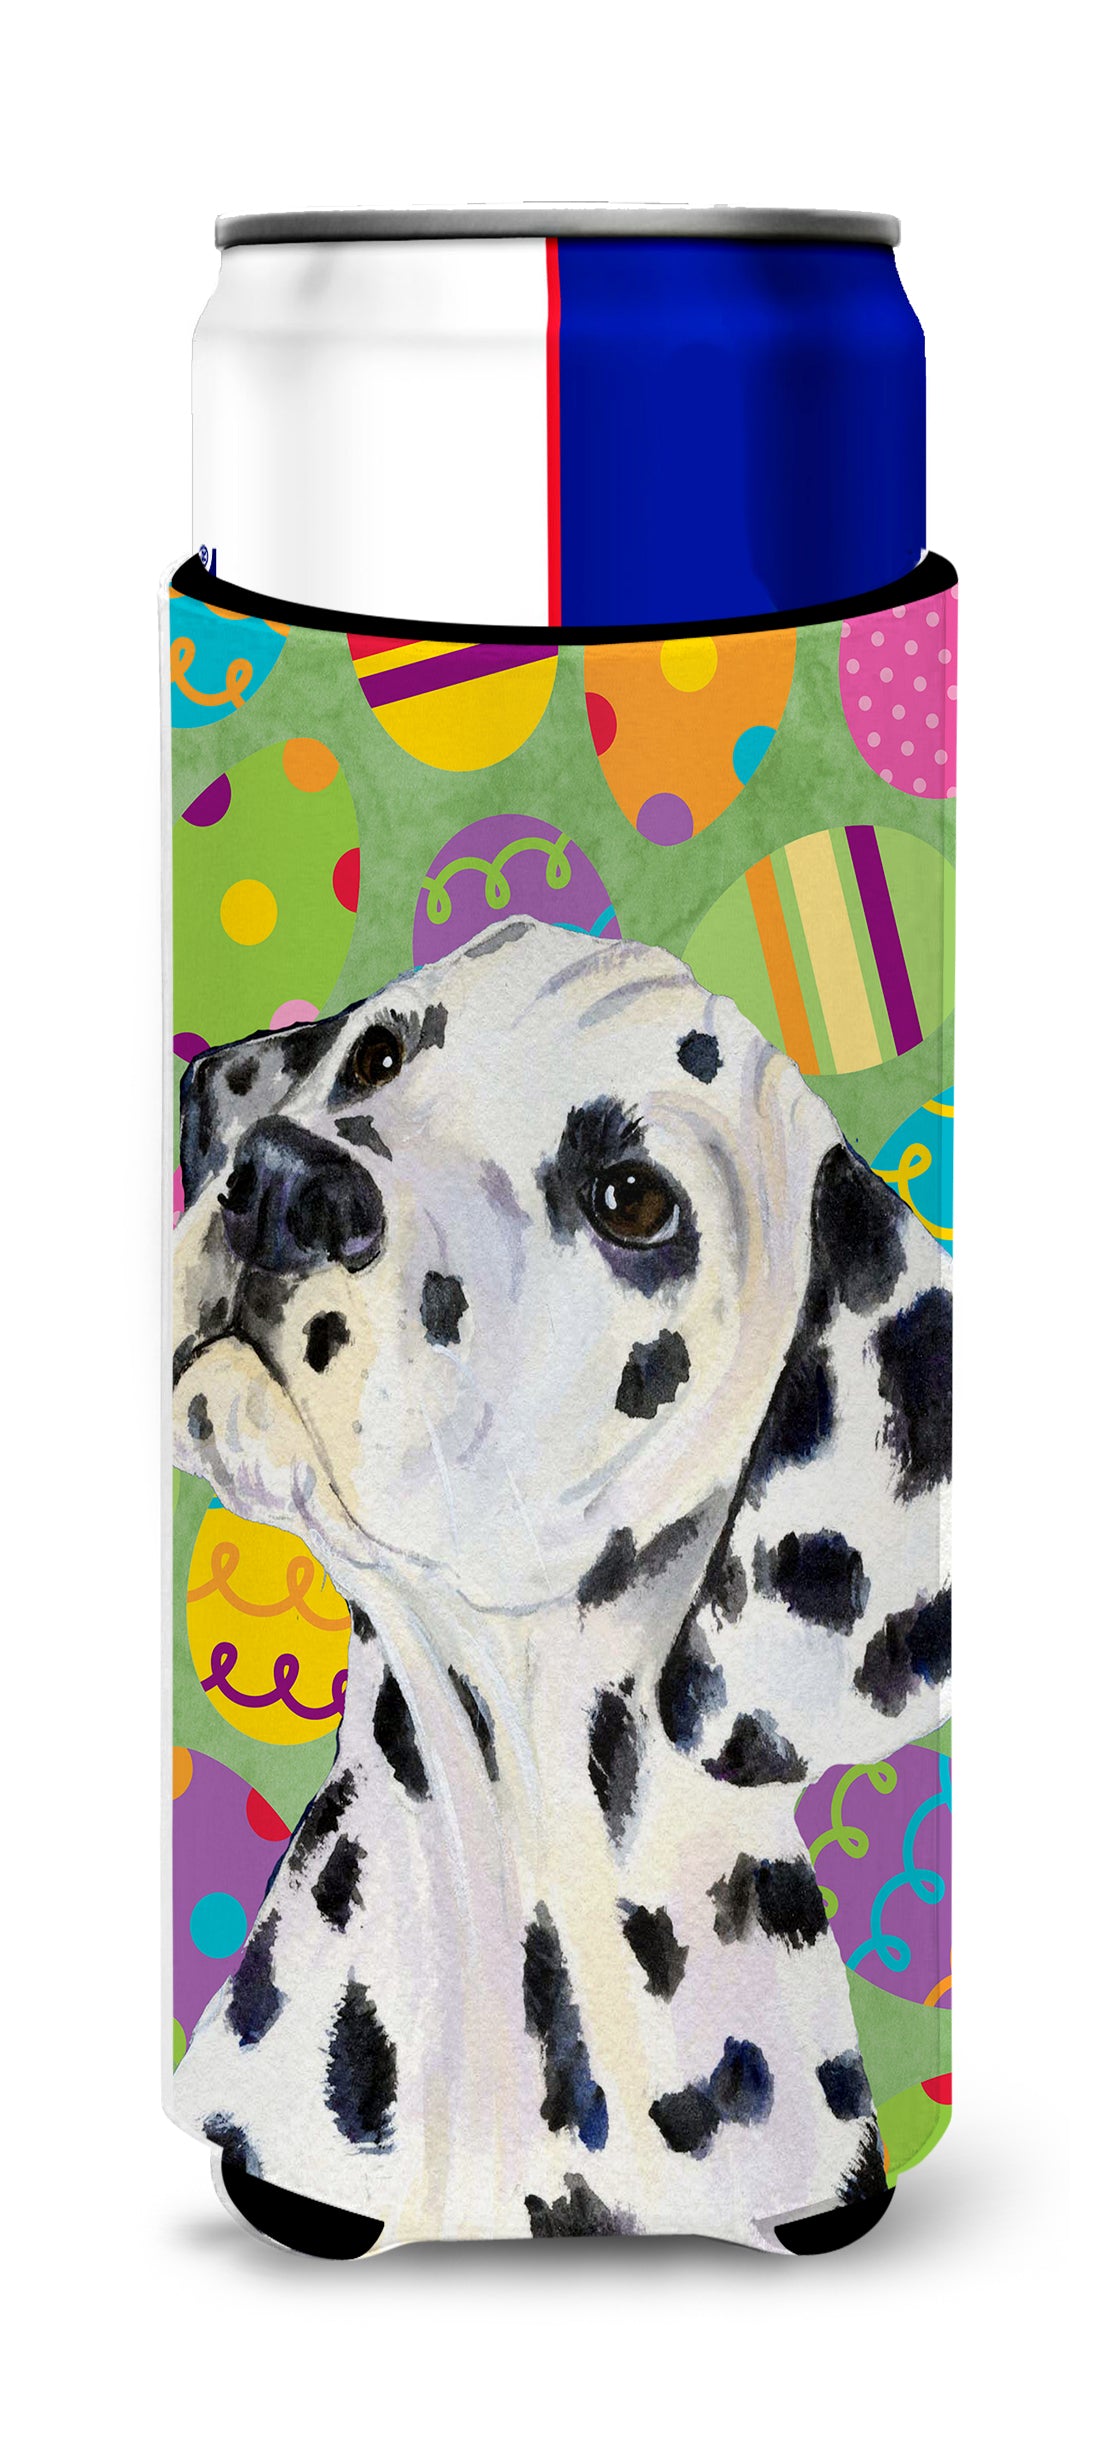 Dalmatian Easter Eggtravaganza Ultra Beverage Insulators for slim cans SS4837MUK